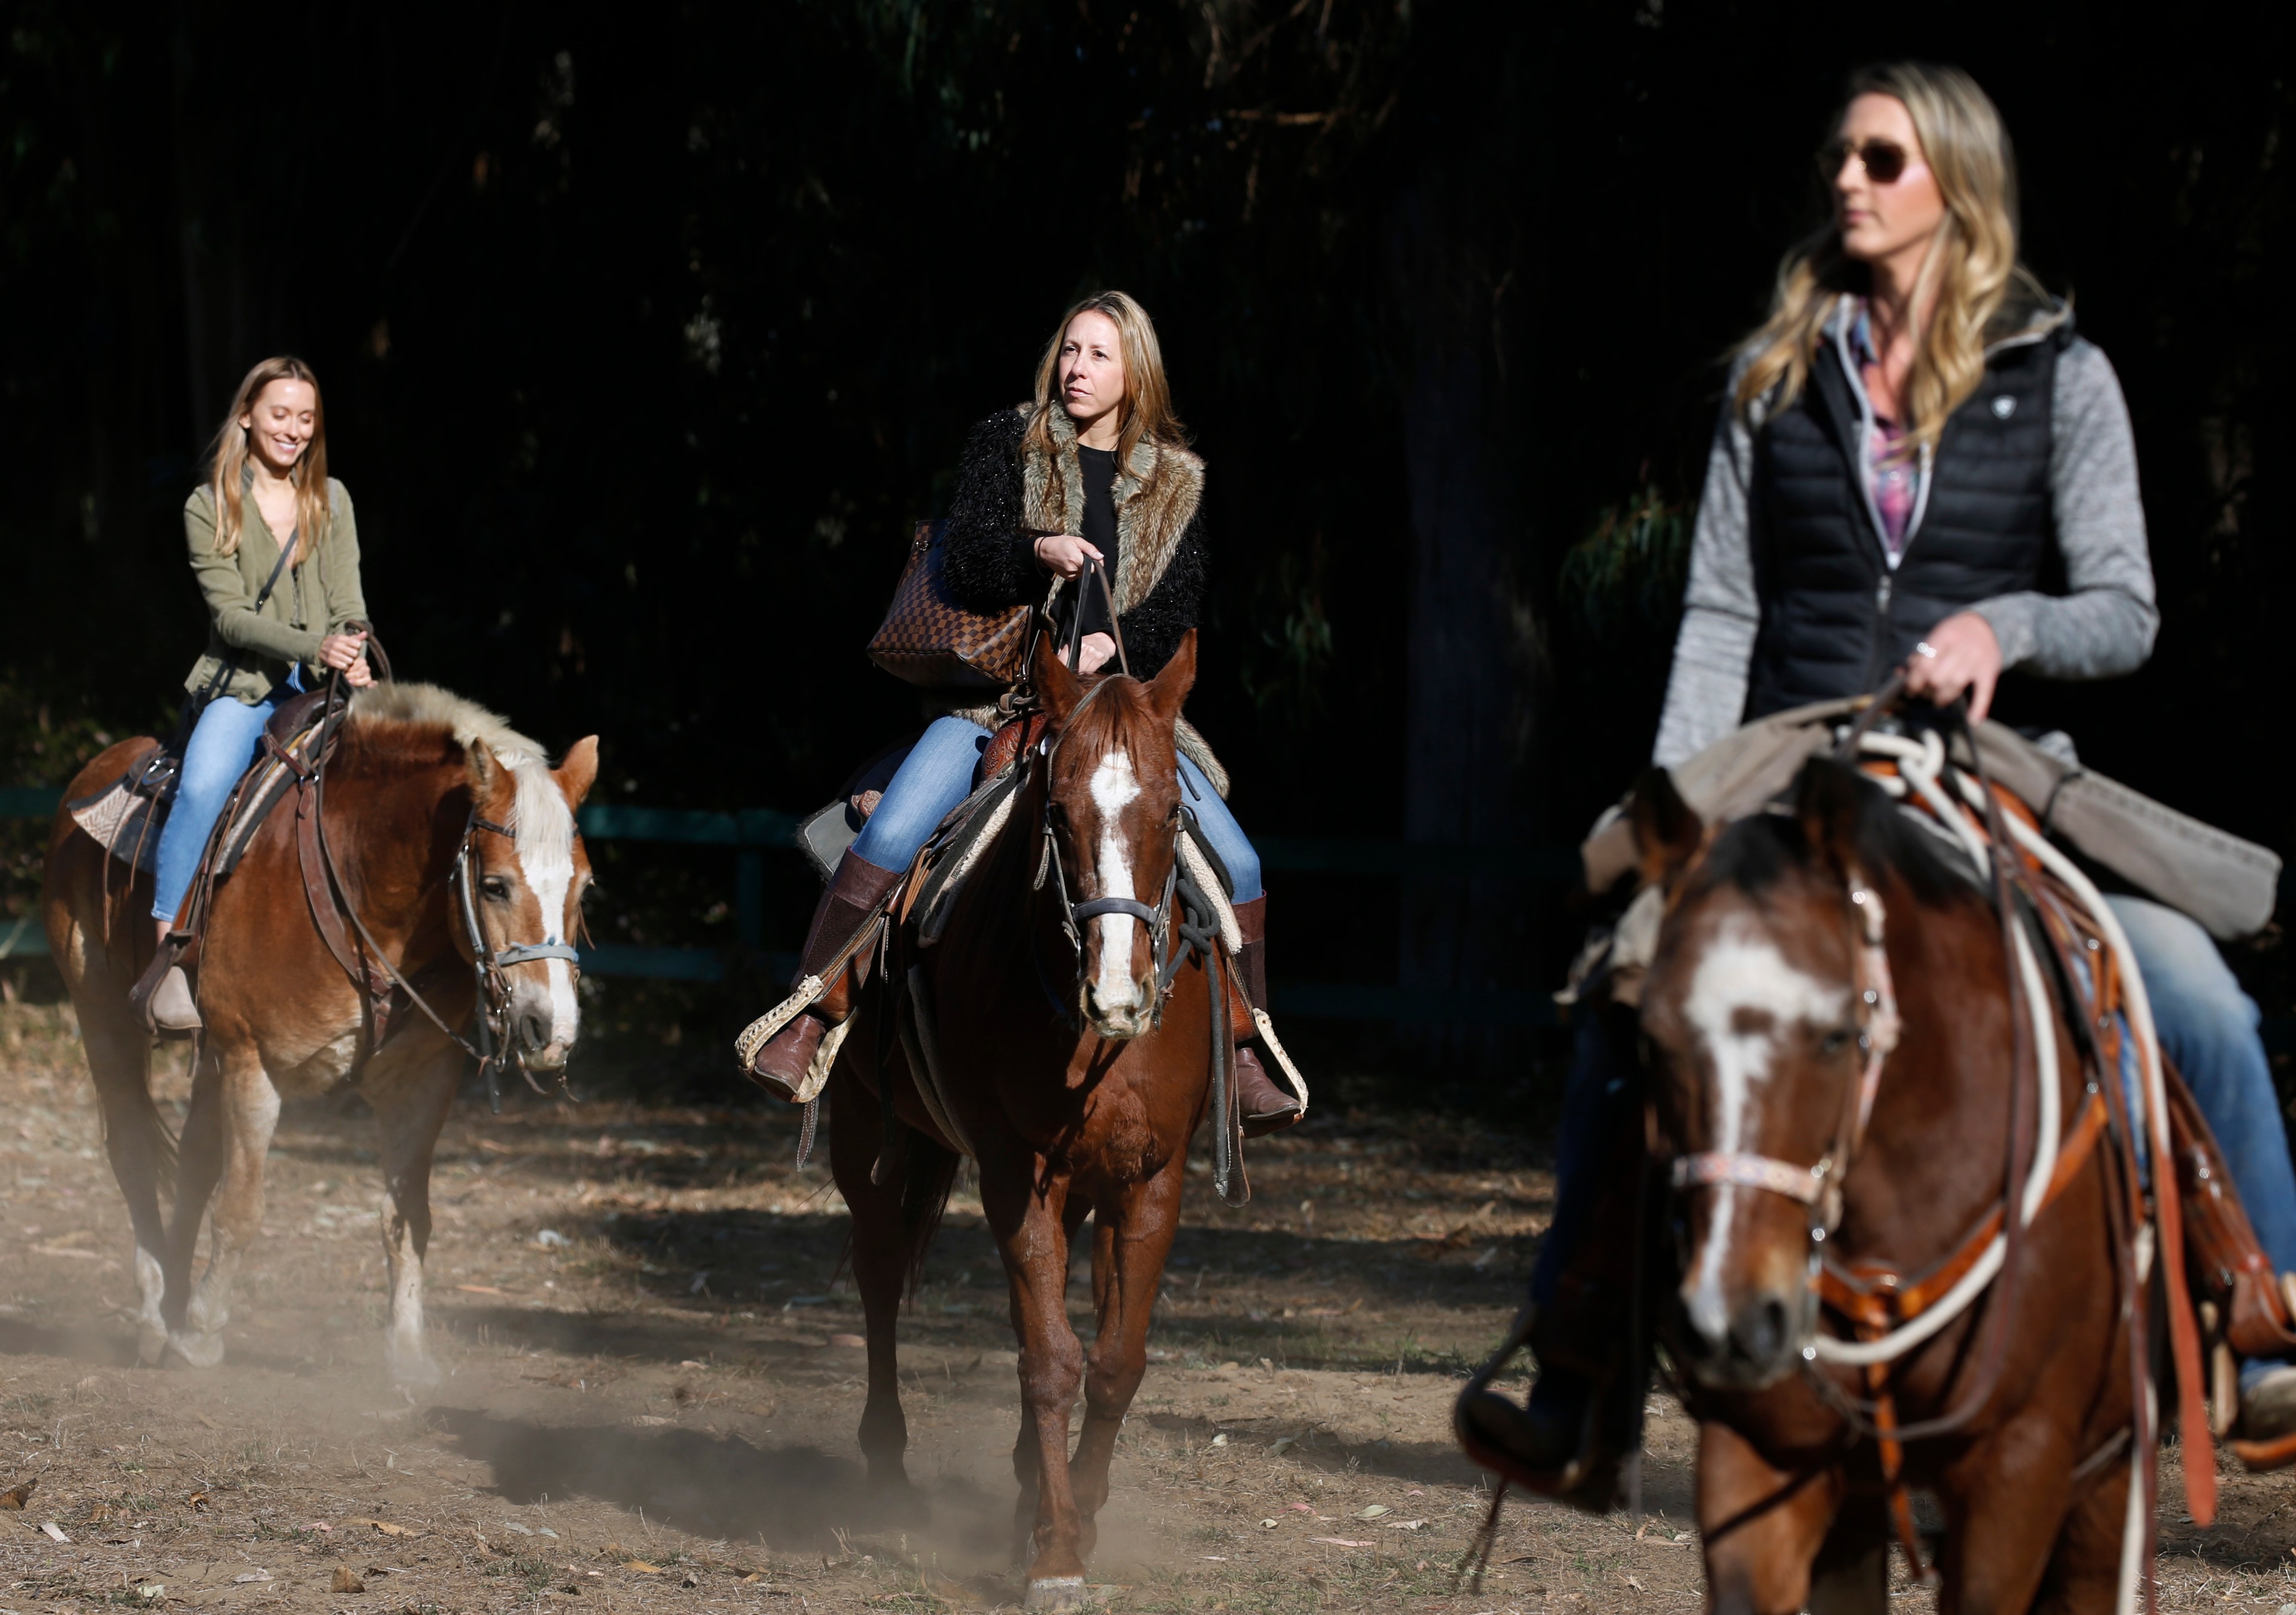 Three women ride horses on a sunny trail, one smiling, one serious, and one focused, casting shadows over a dusty path.